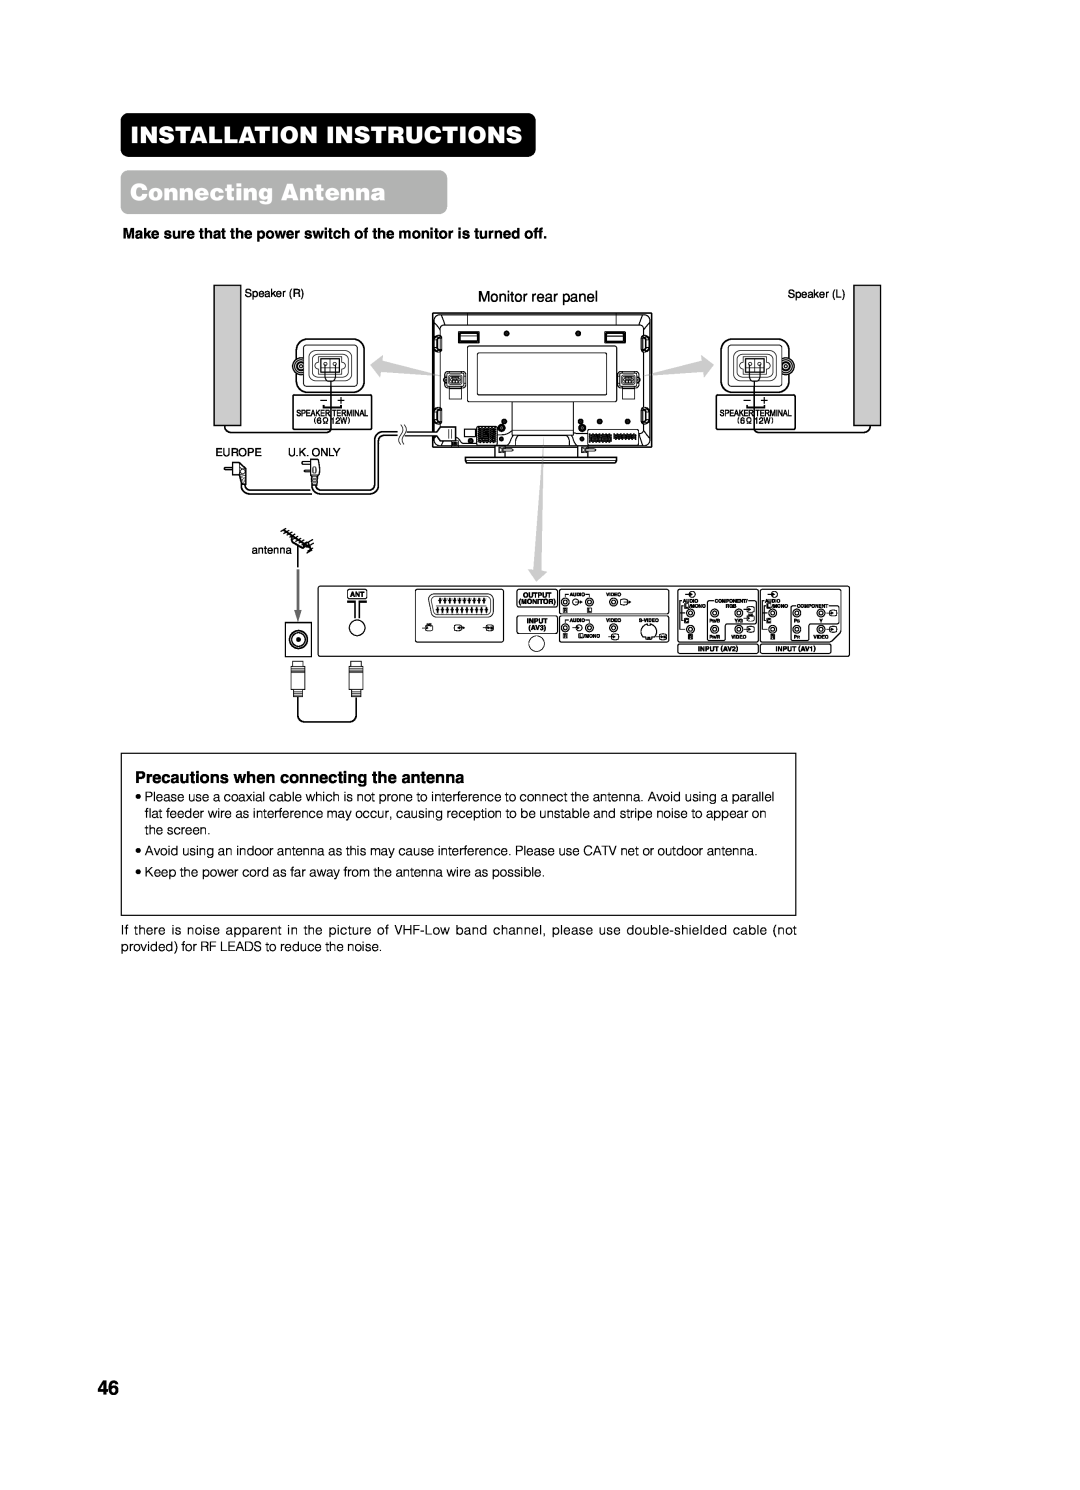 Yamaha PDM-4210E user manual INSTALLATION INSTRUCTIONS Connecting Antenna, Precautions when connecting the antenna 